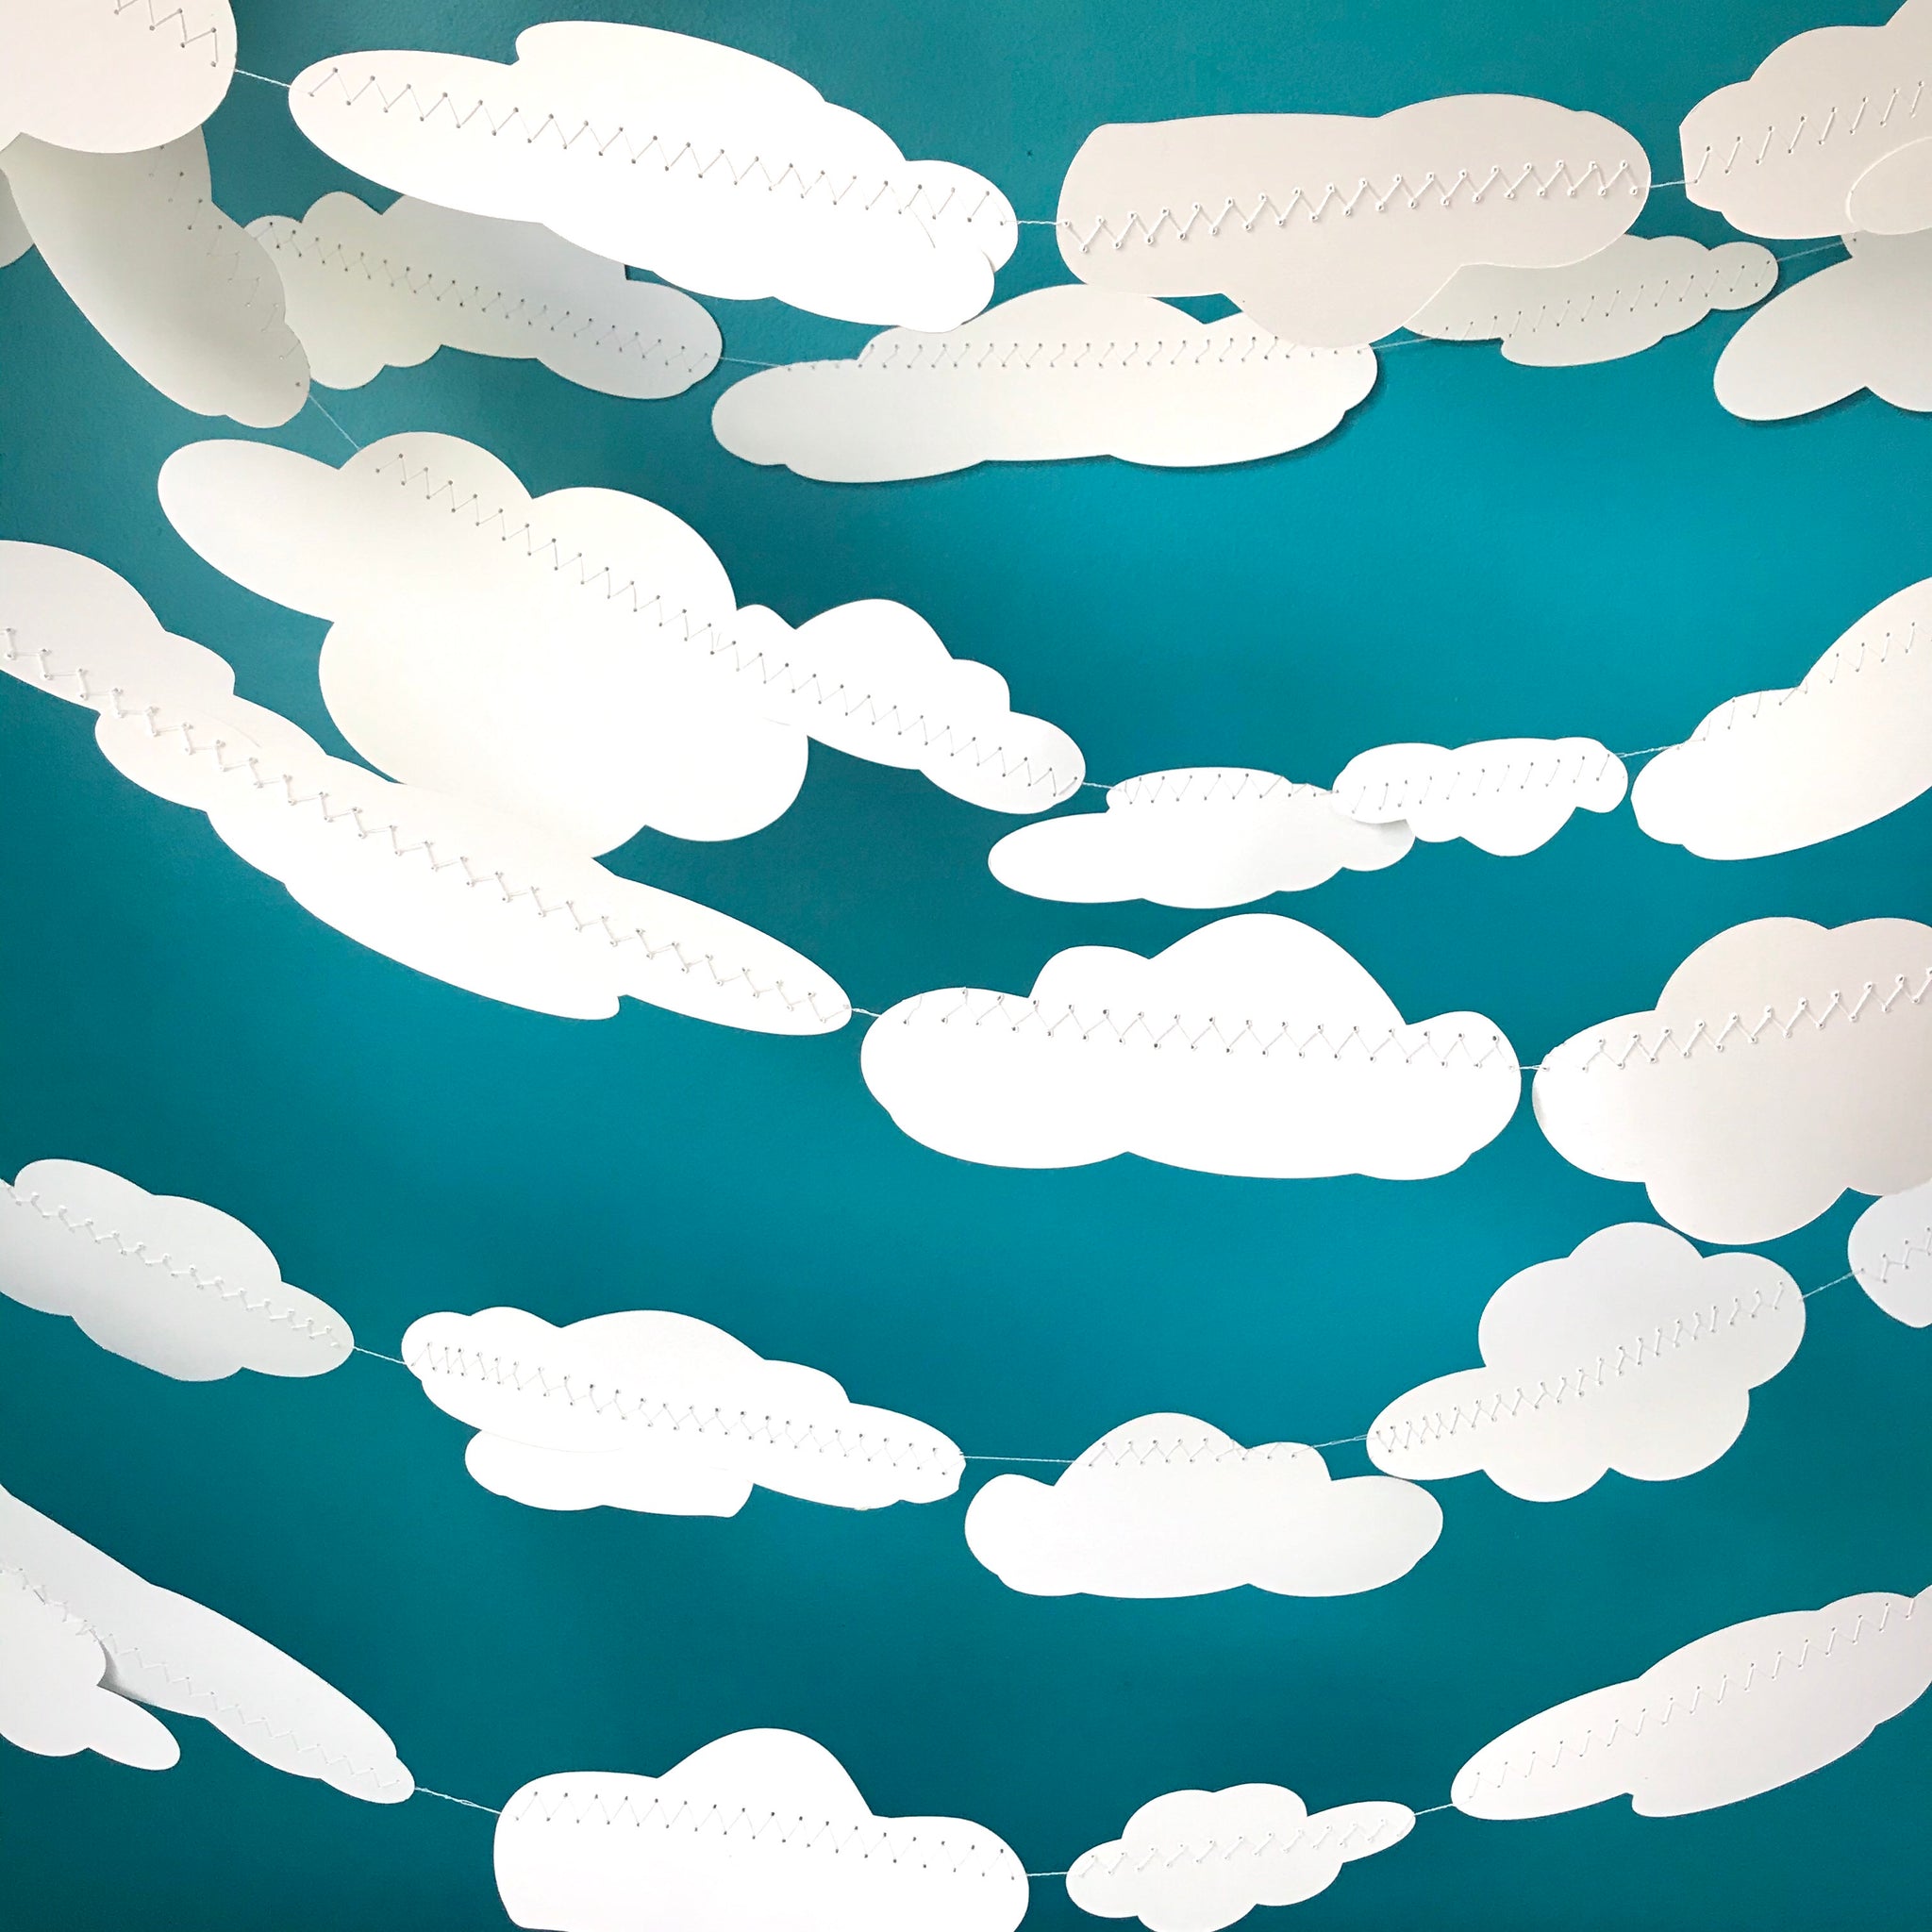 Dozens of white cloud shapes are shown against a blue background.